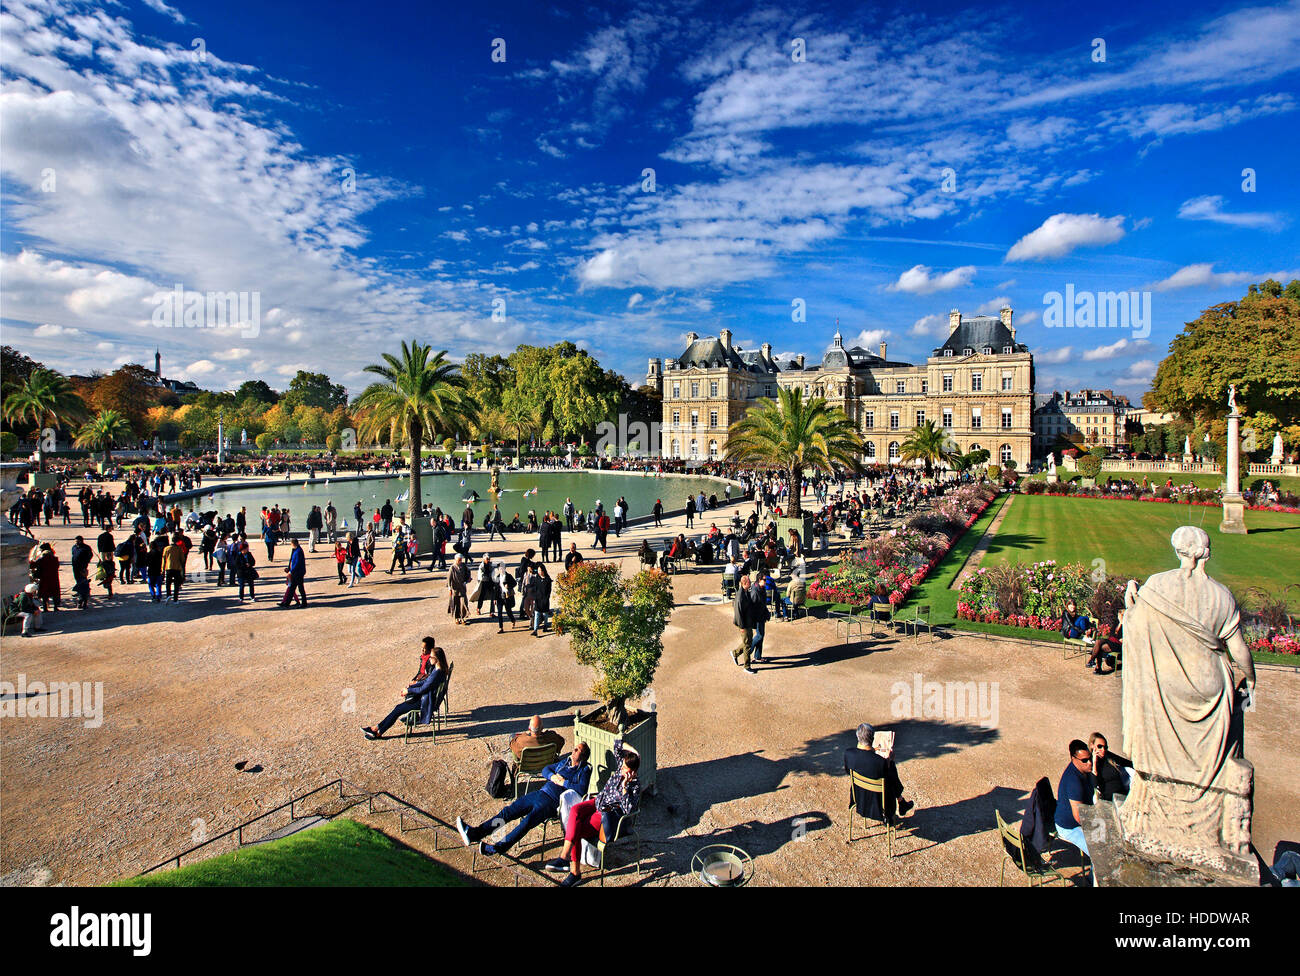 The Luxembourg Palace (Palais du Luxembourg)  and Garden (Jardin du Luxembourg),in the 6th arrondissement of Paris, France. Stock Photo